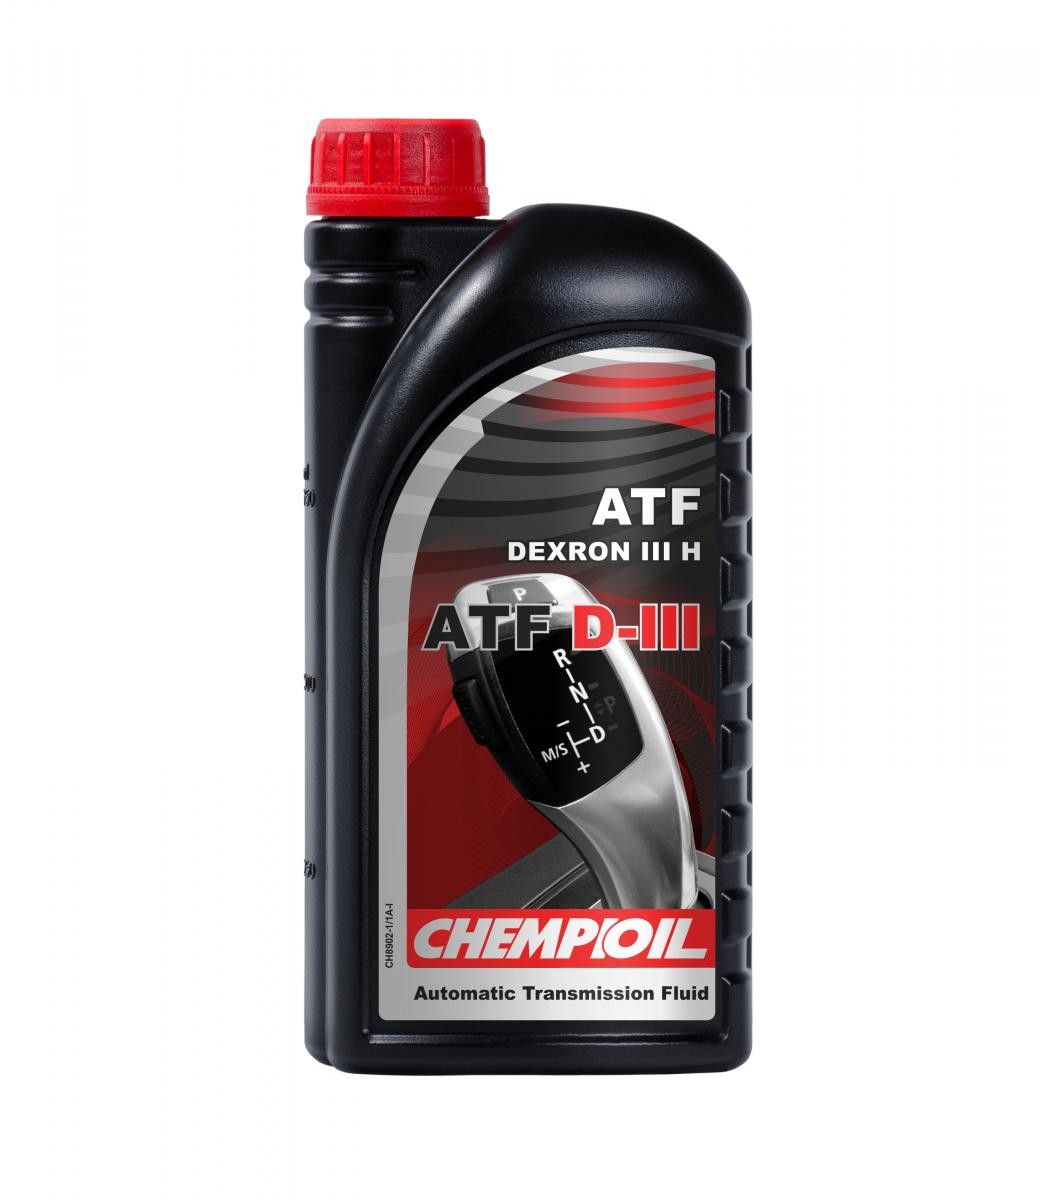 Audi A4 B8 Allroad Propshafts and differentials parts - Automatic transmission fluid CHEMPIOIL CH8902-1